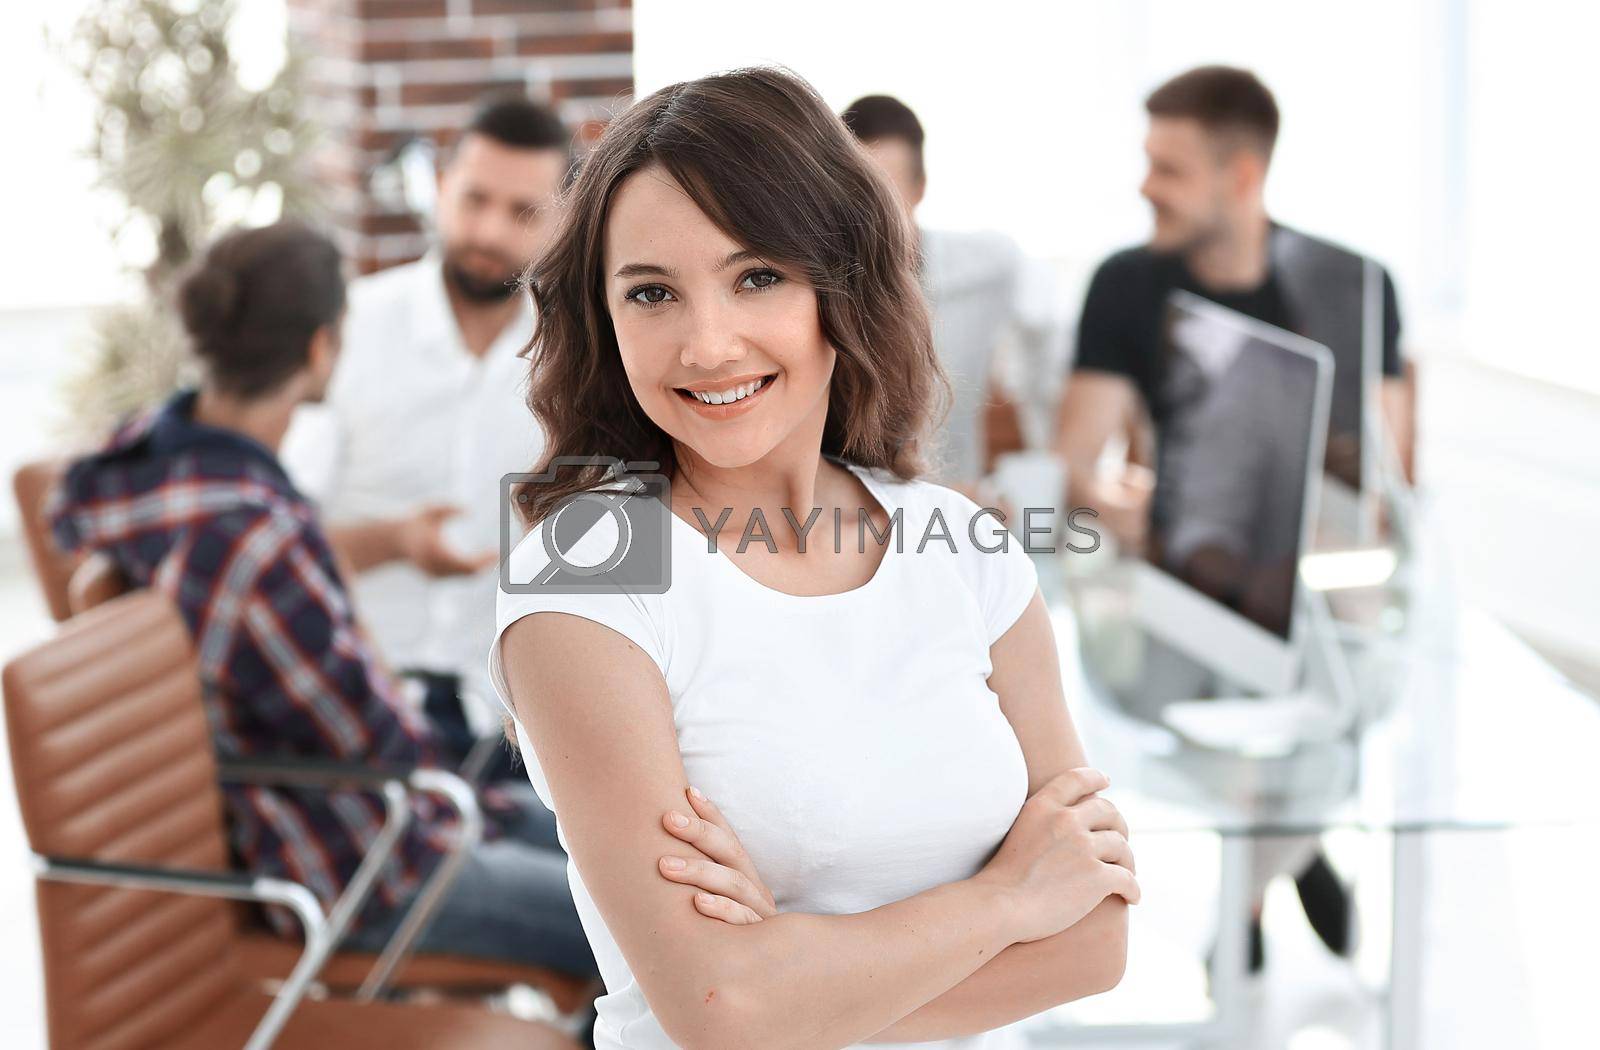 Royalty free image of portrait of a young employee in the office by asdf